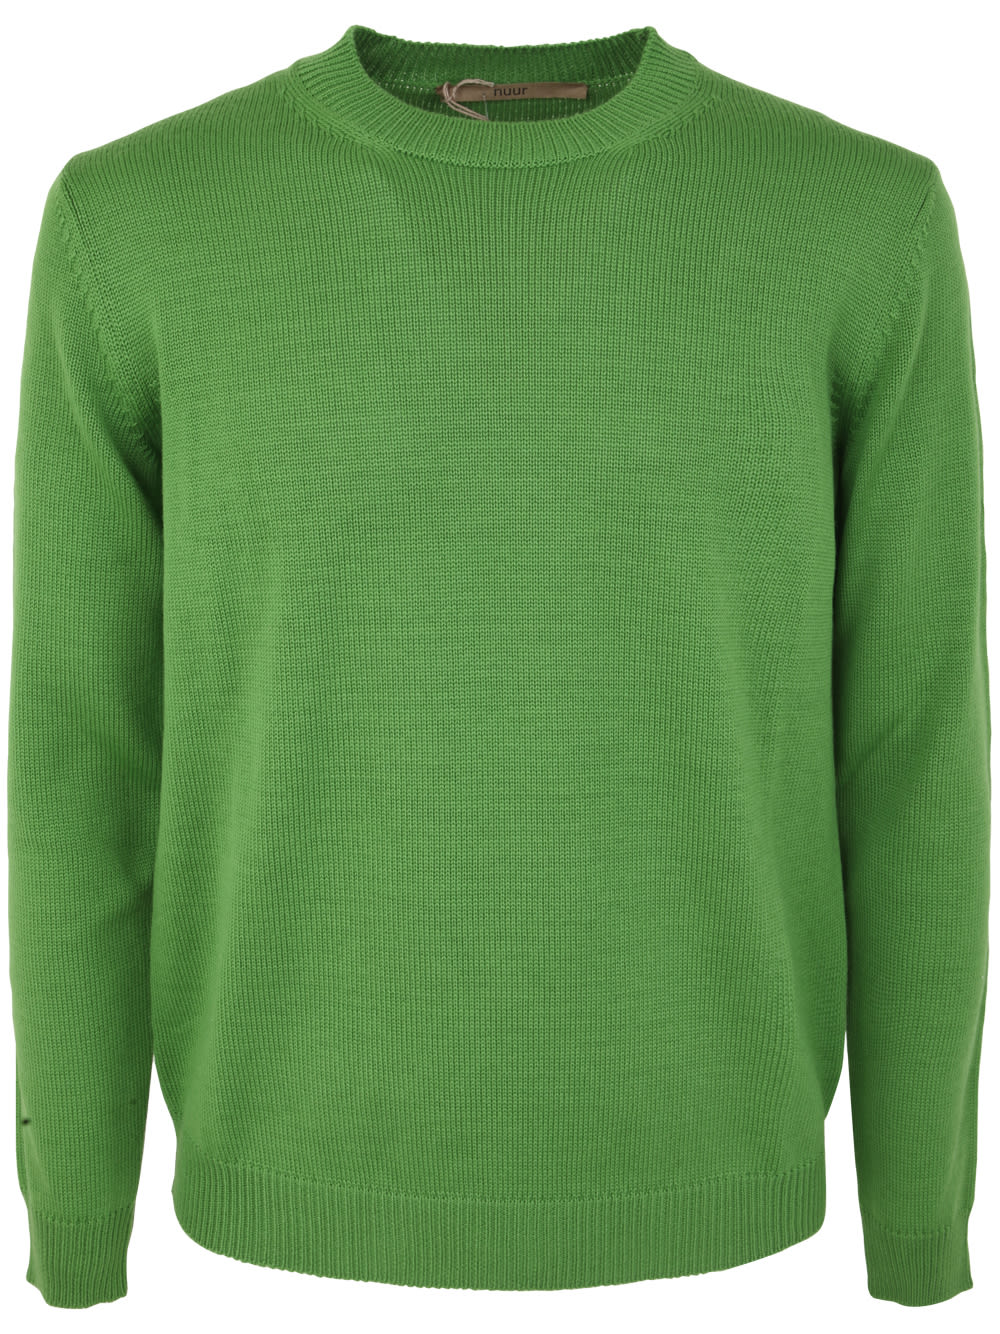 Shop Nuur Long Sleeve Crew Neck Sweater In Green